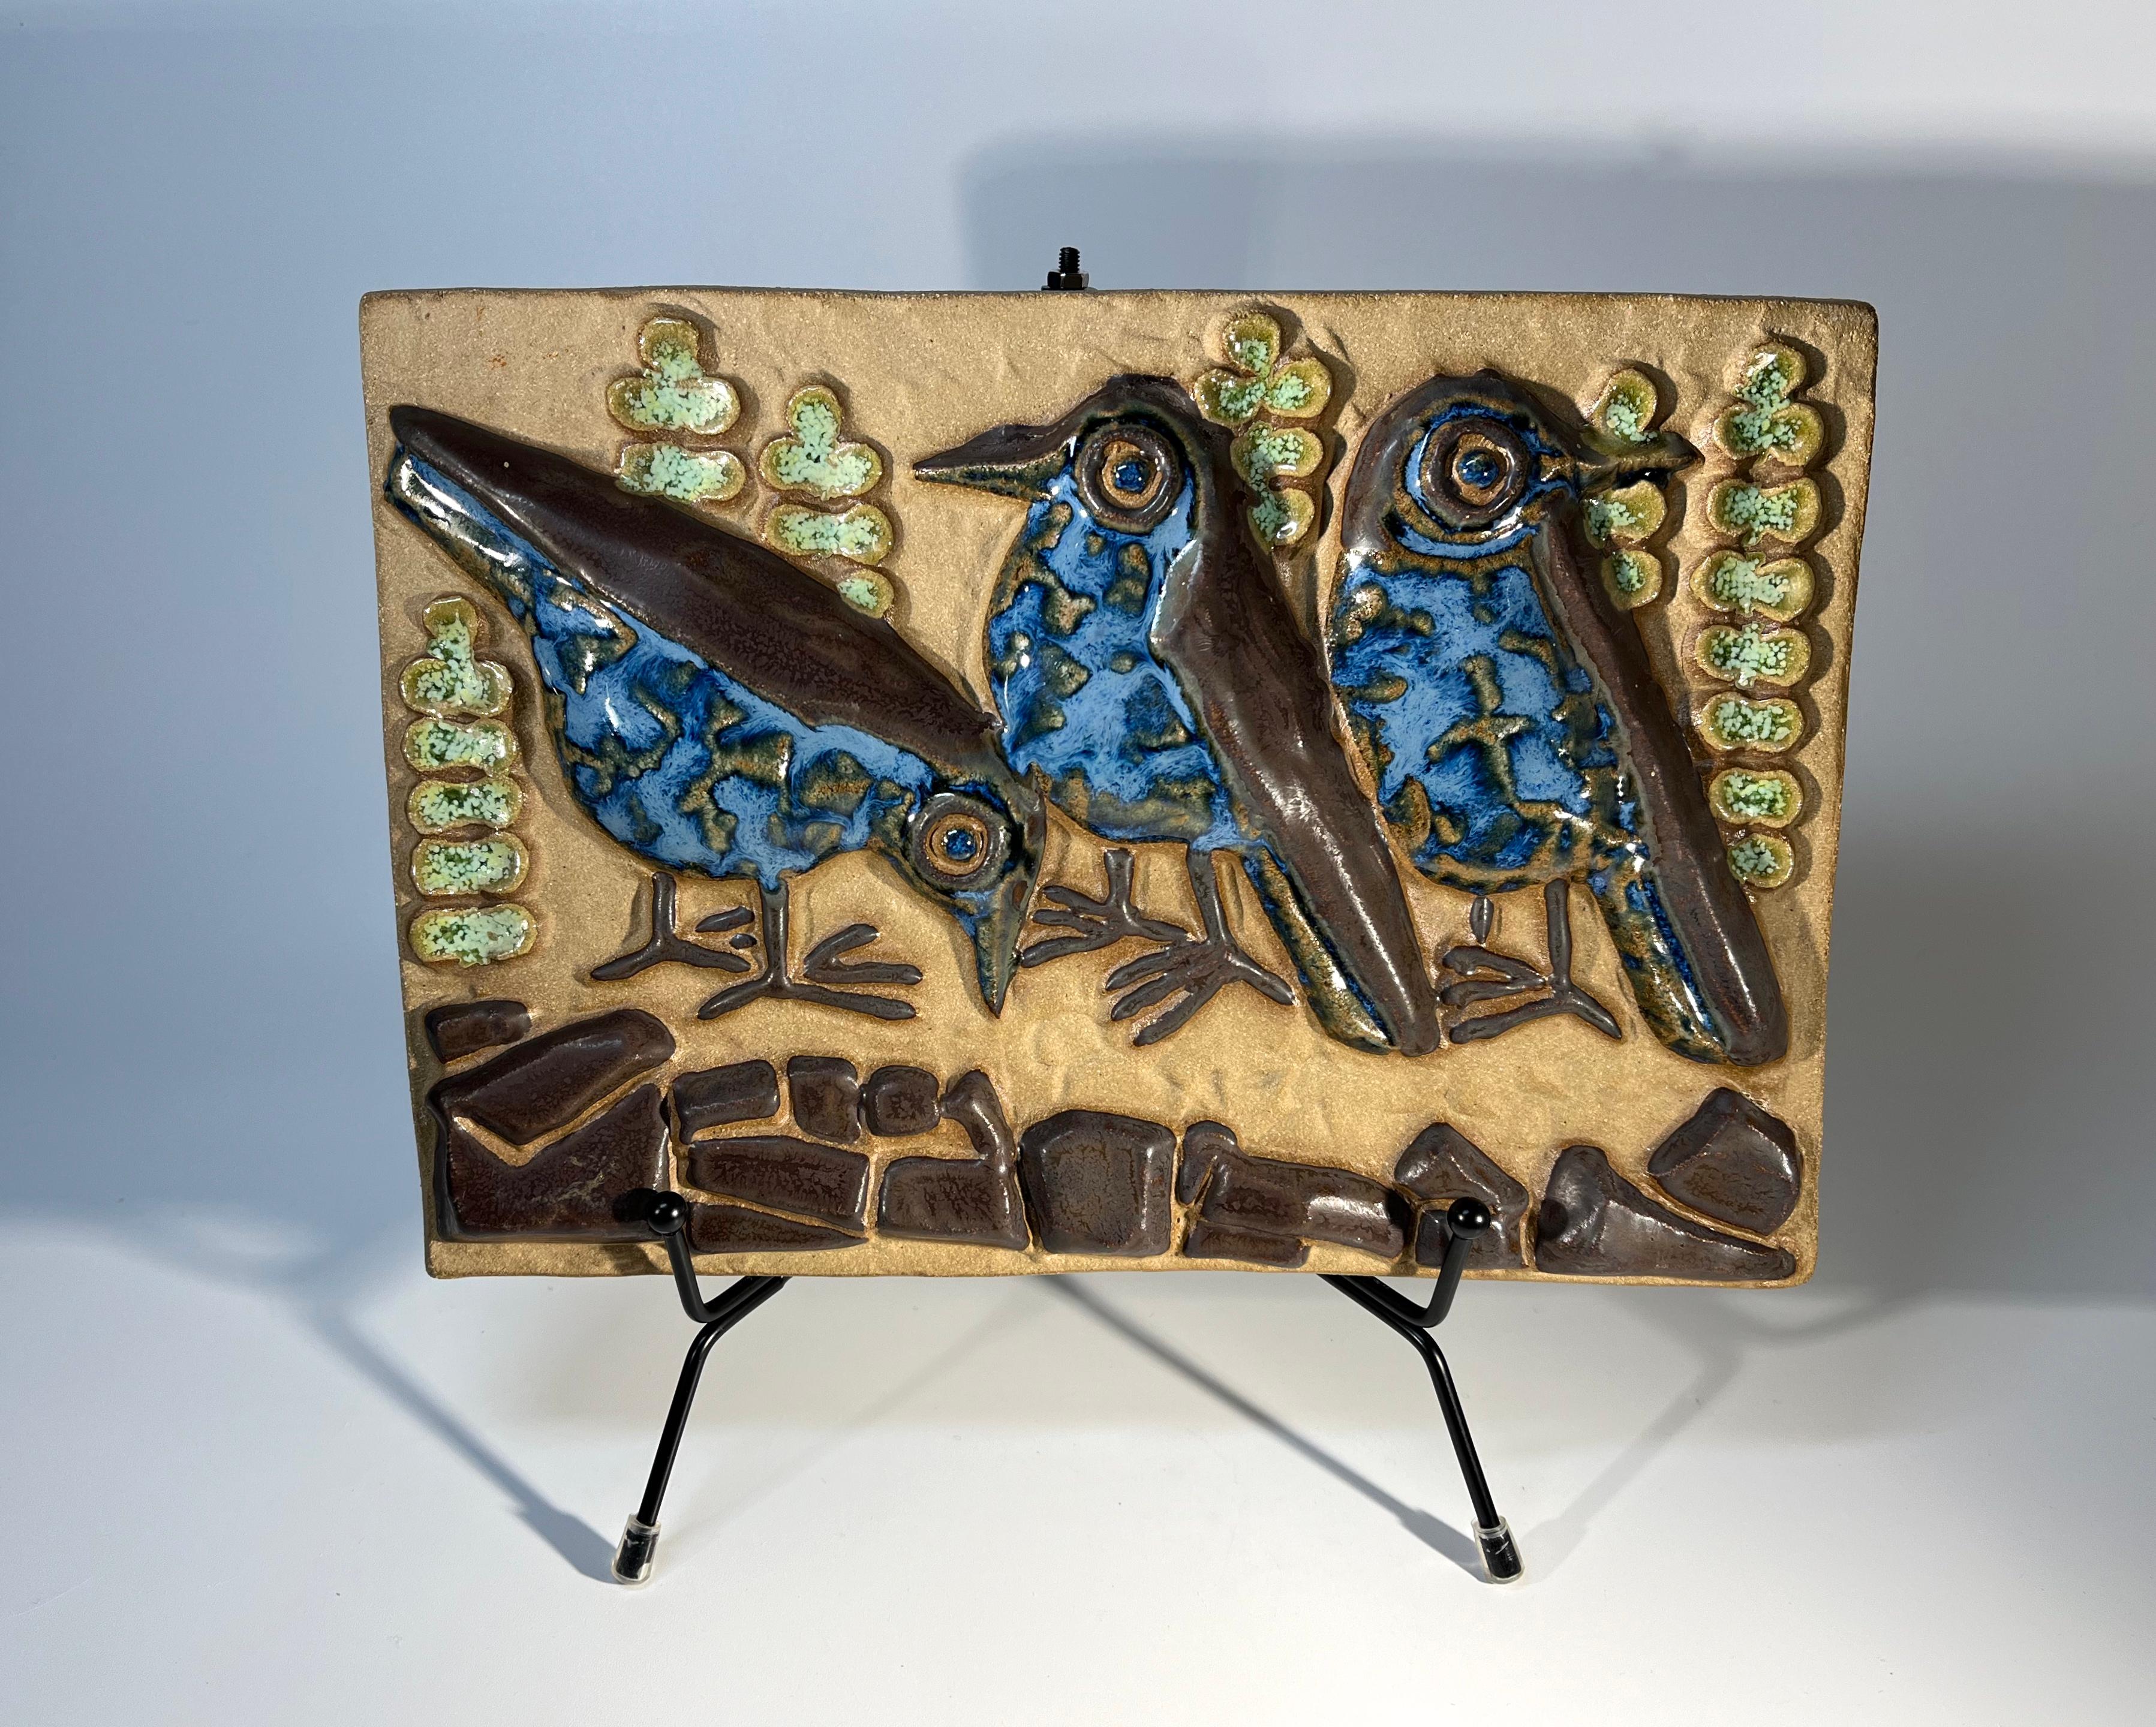 20th Century Bluebirds Trio By Marianne Starck For Michael Andersen. Danish Wall Plaque For Sale